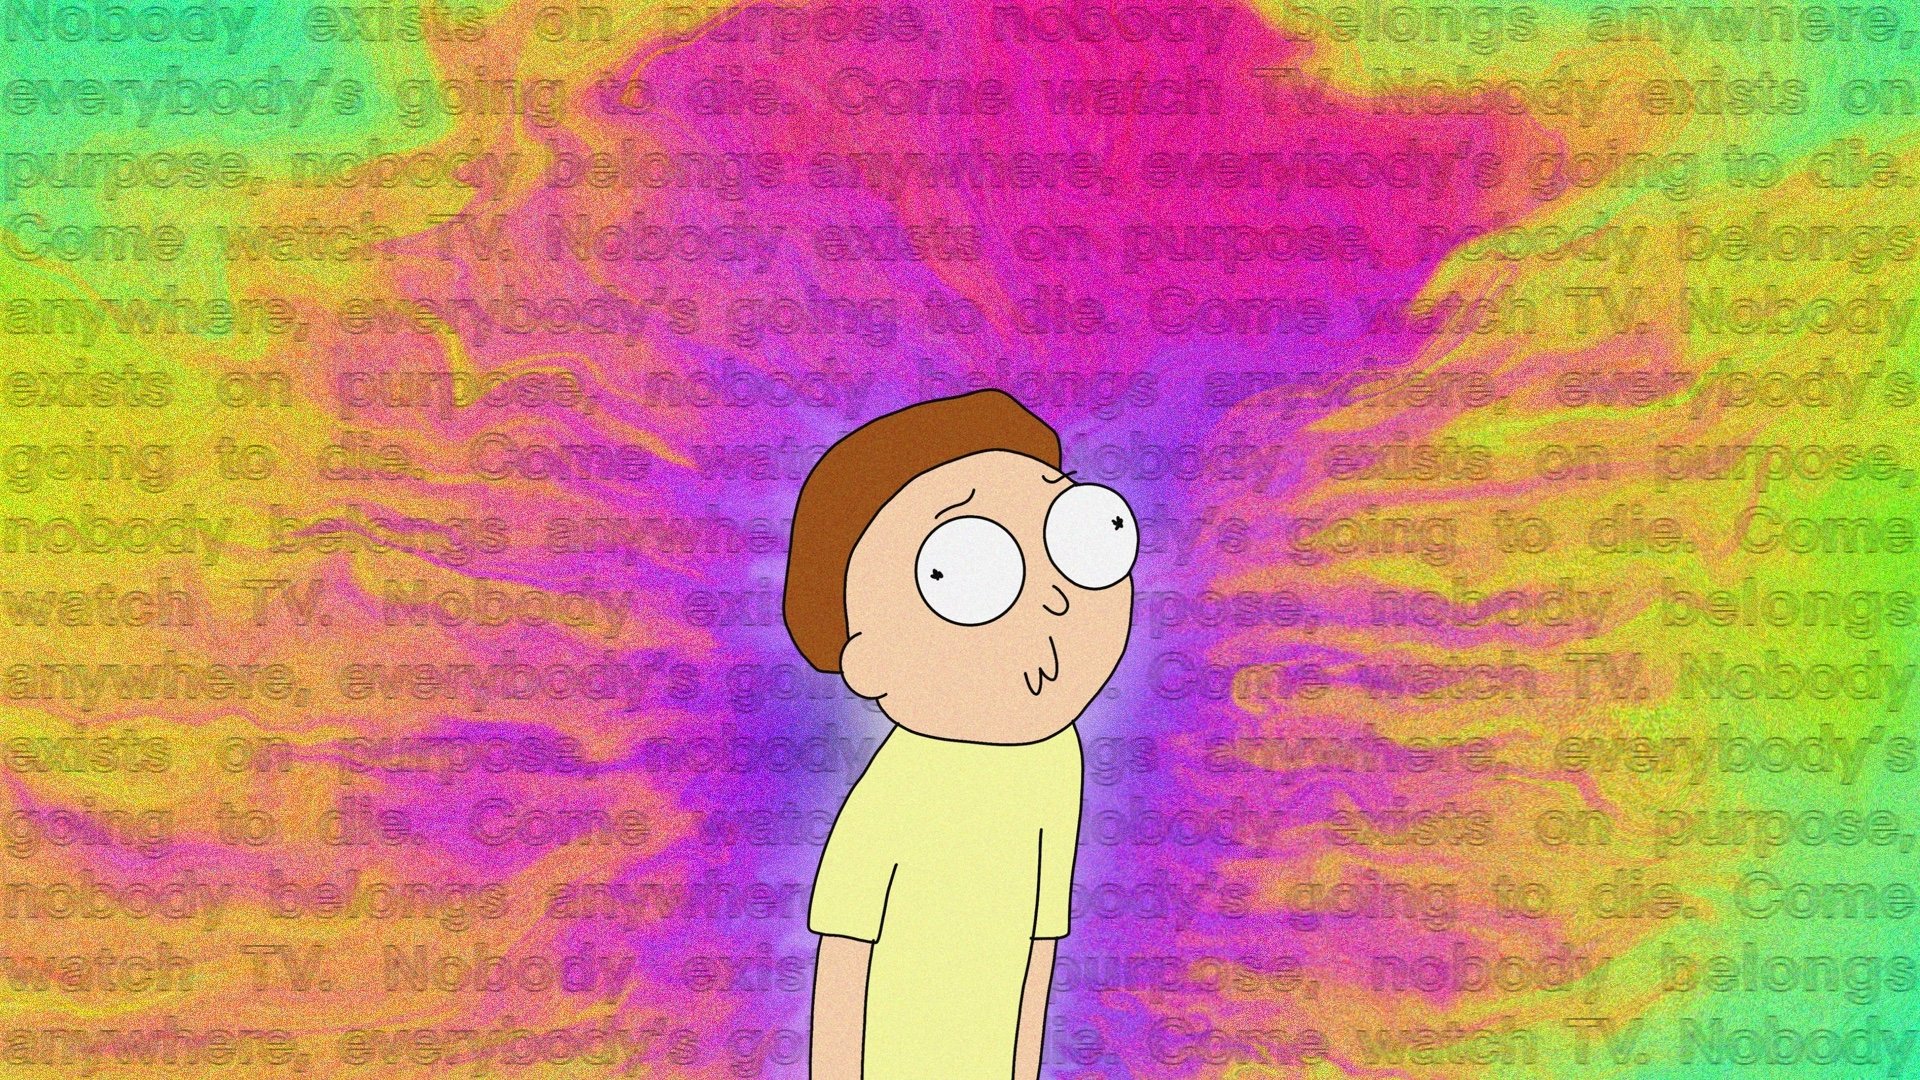 Live Wallpapers tagged with Morty